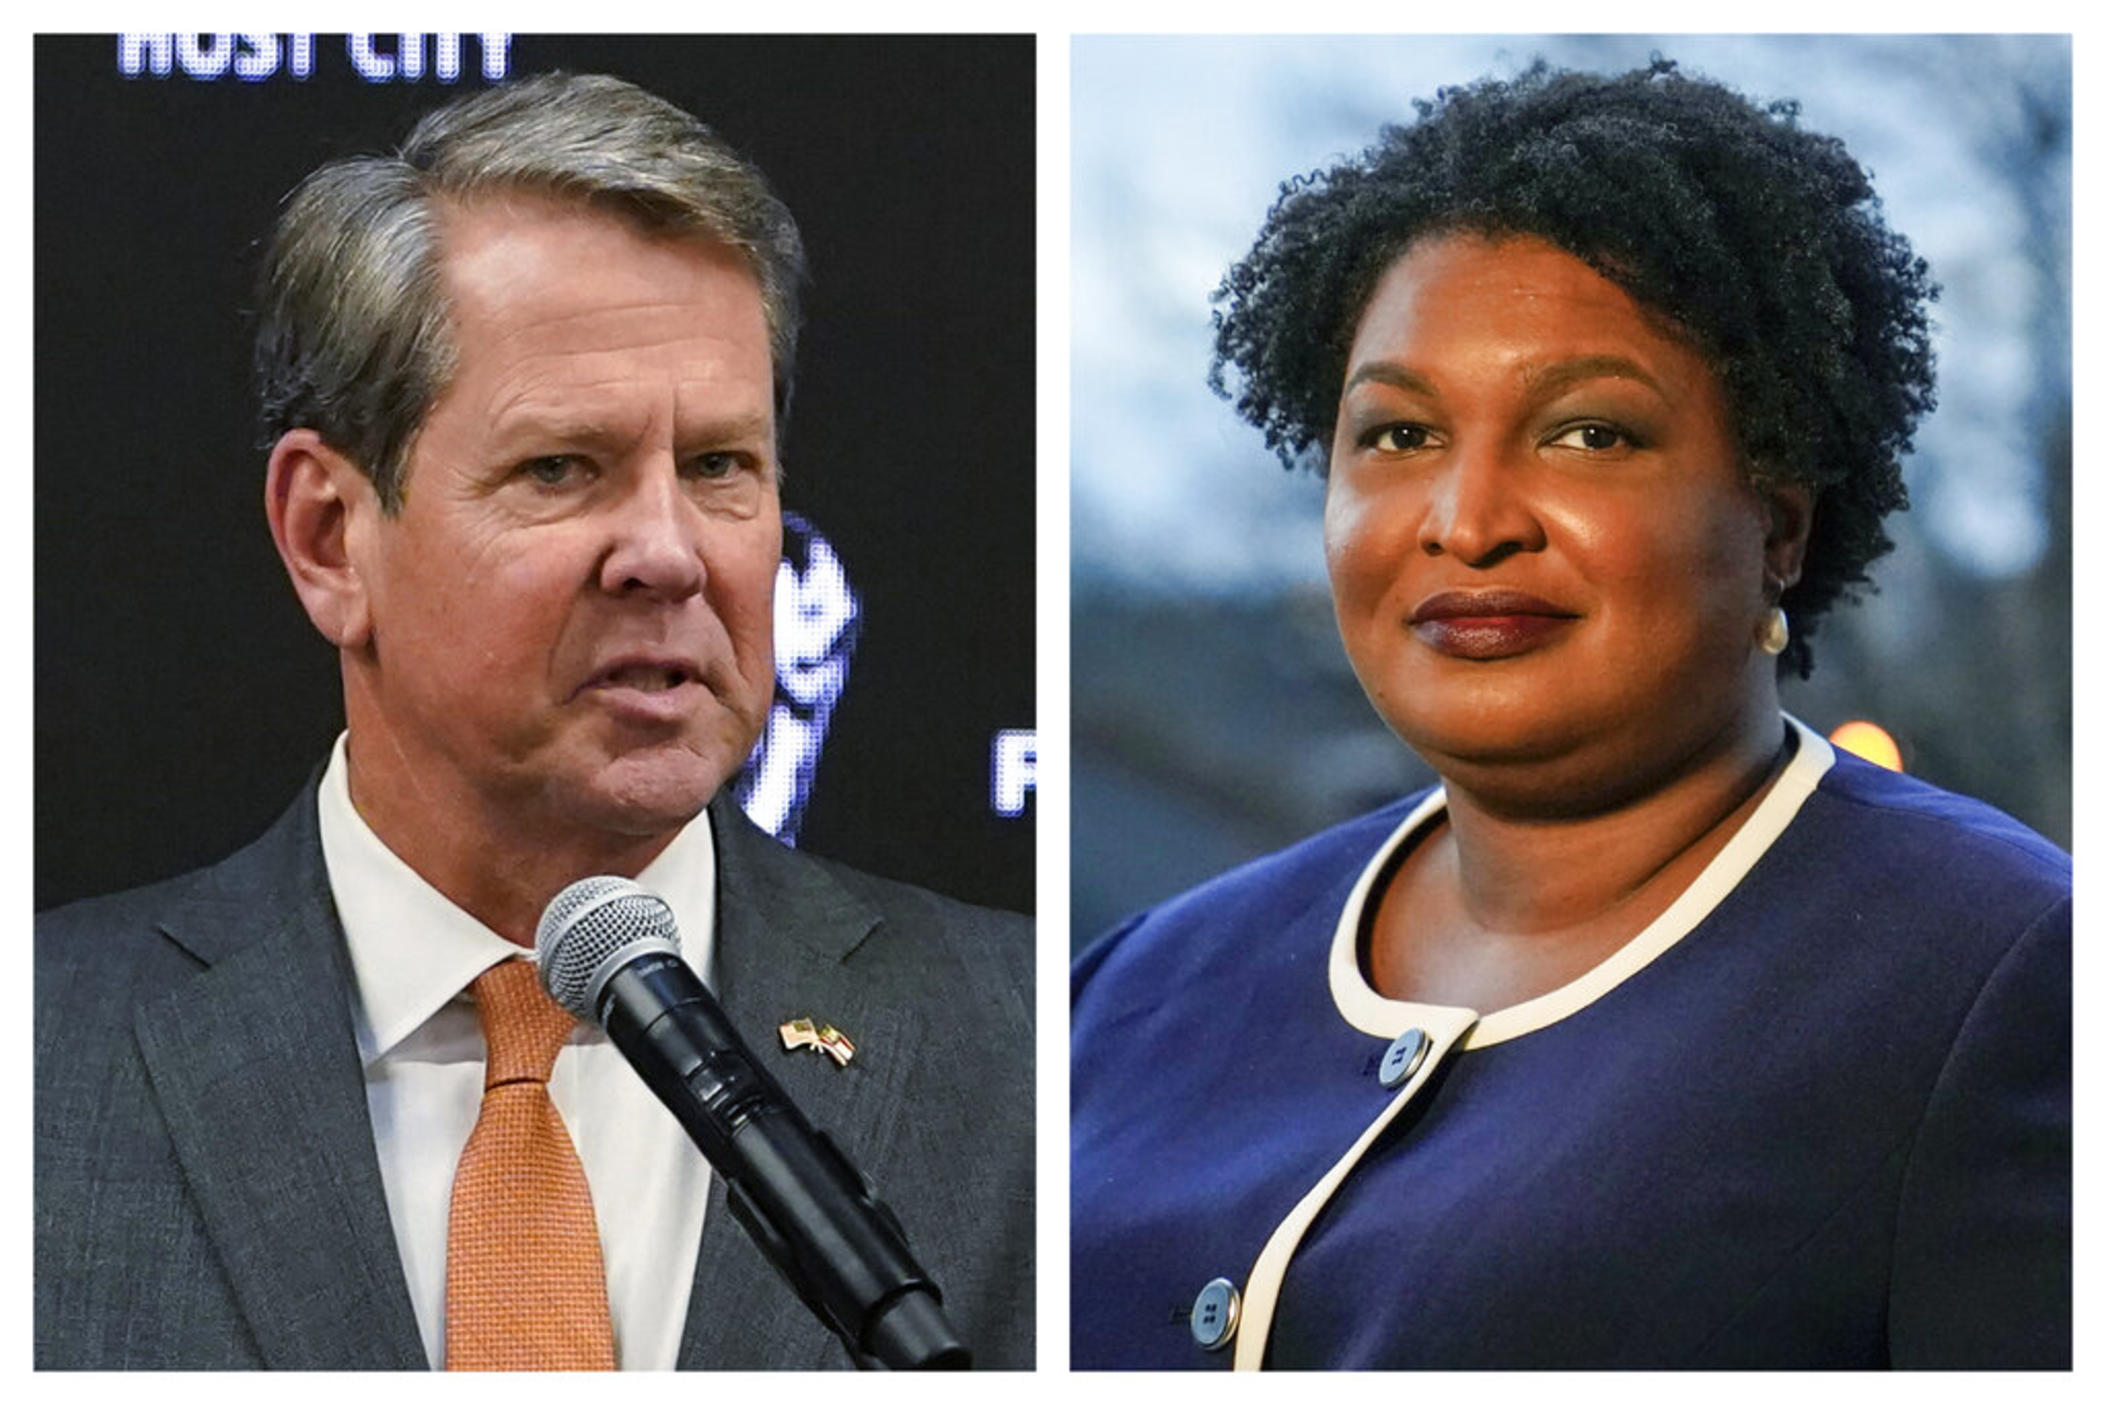  This combination of 2022 and 2021 photos shows Georgia Gov. Brian Kemp, left, and gubernatorial Democratic candidate Stacey Abrams. The Republican Kemp announced Wednesday, July 6, 2022, that his campaign committee had raised $3.8 million in the two months ended June 30. Abrams hasn't released June 30, 2022, numbers but raised more than $20 million between December and April.